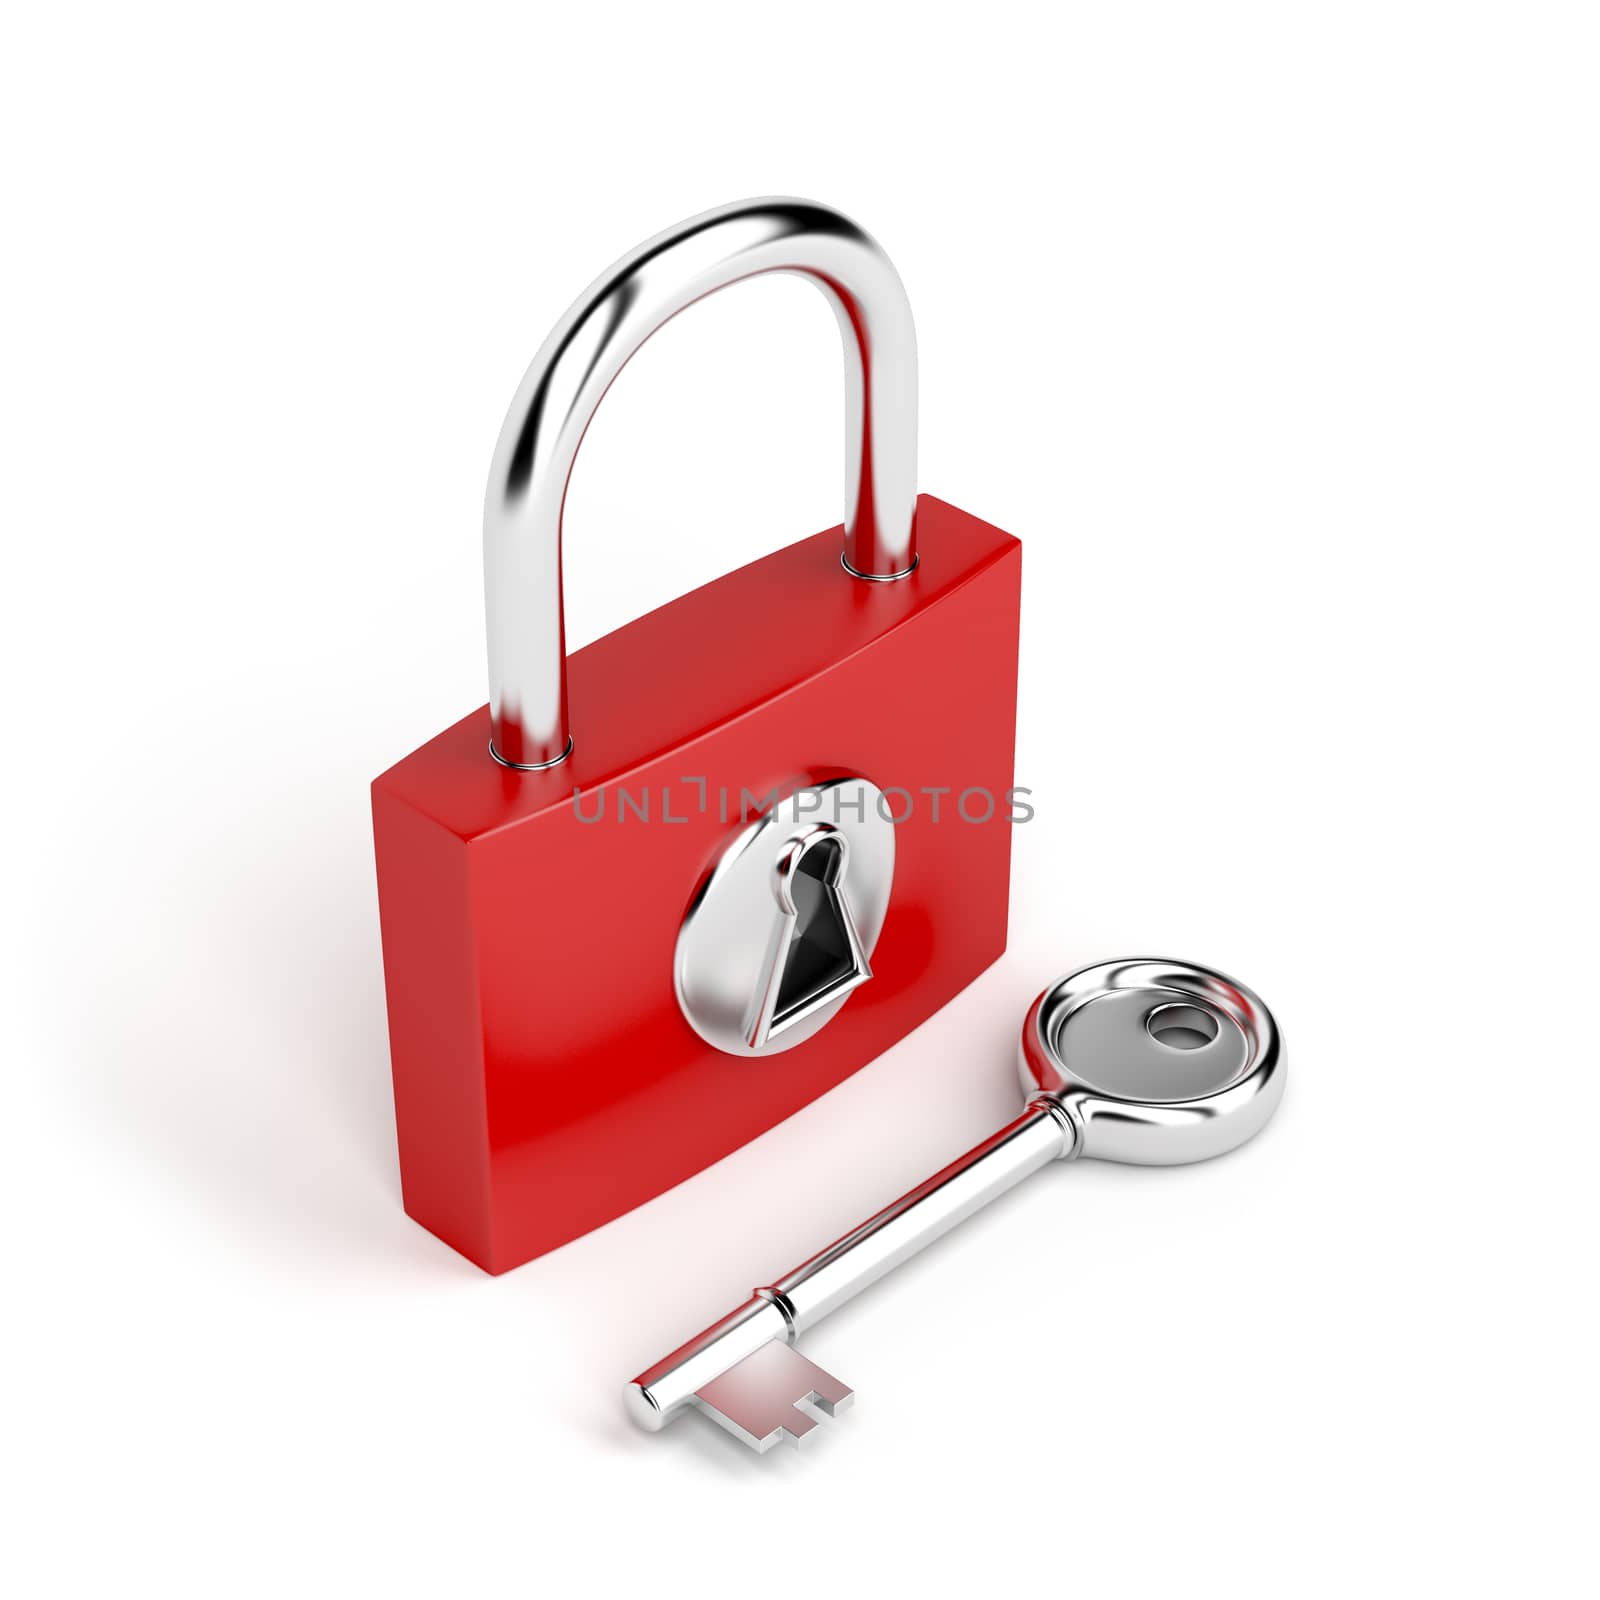 Padlock and key by magraphics